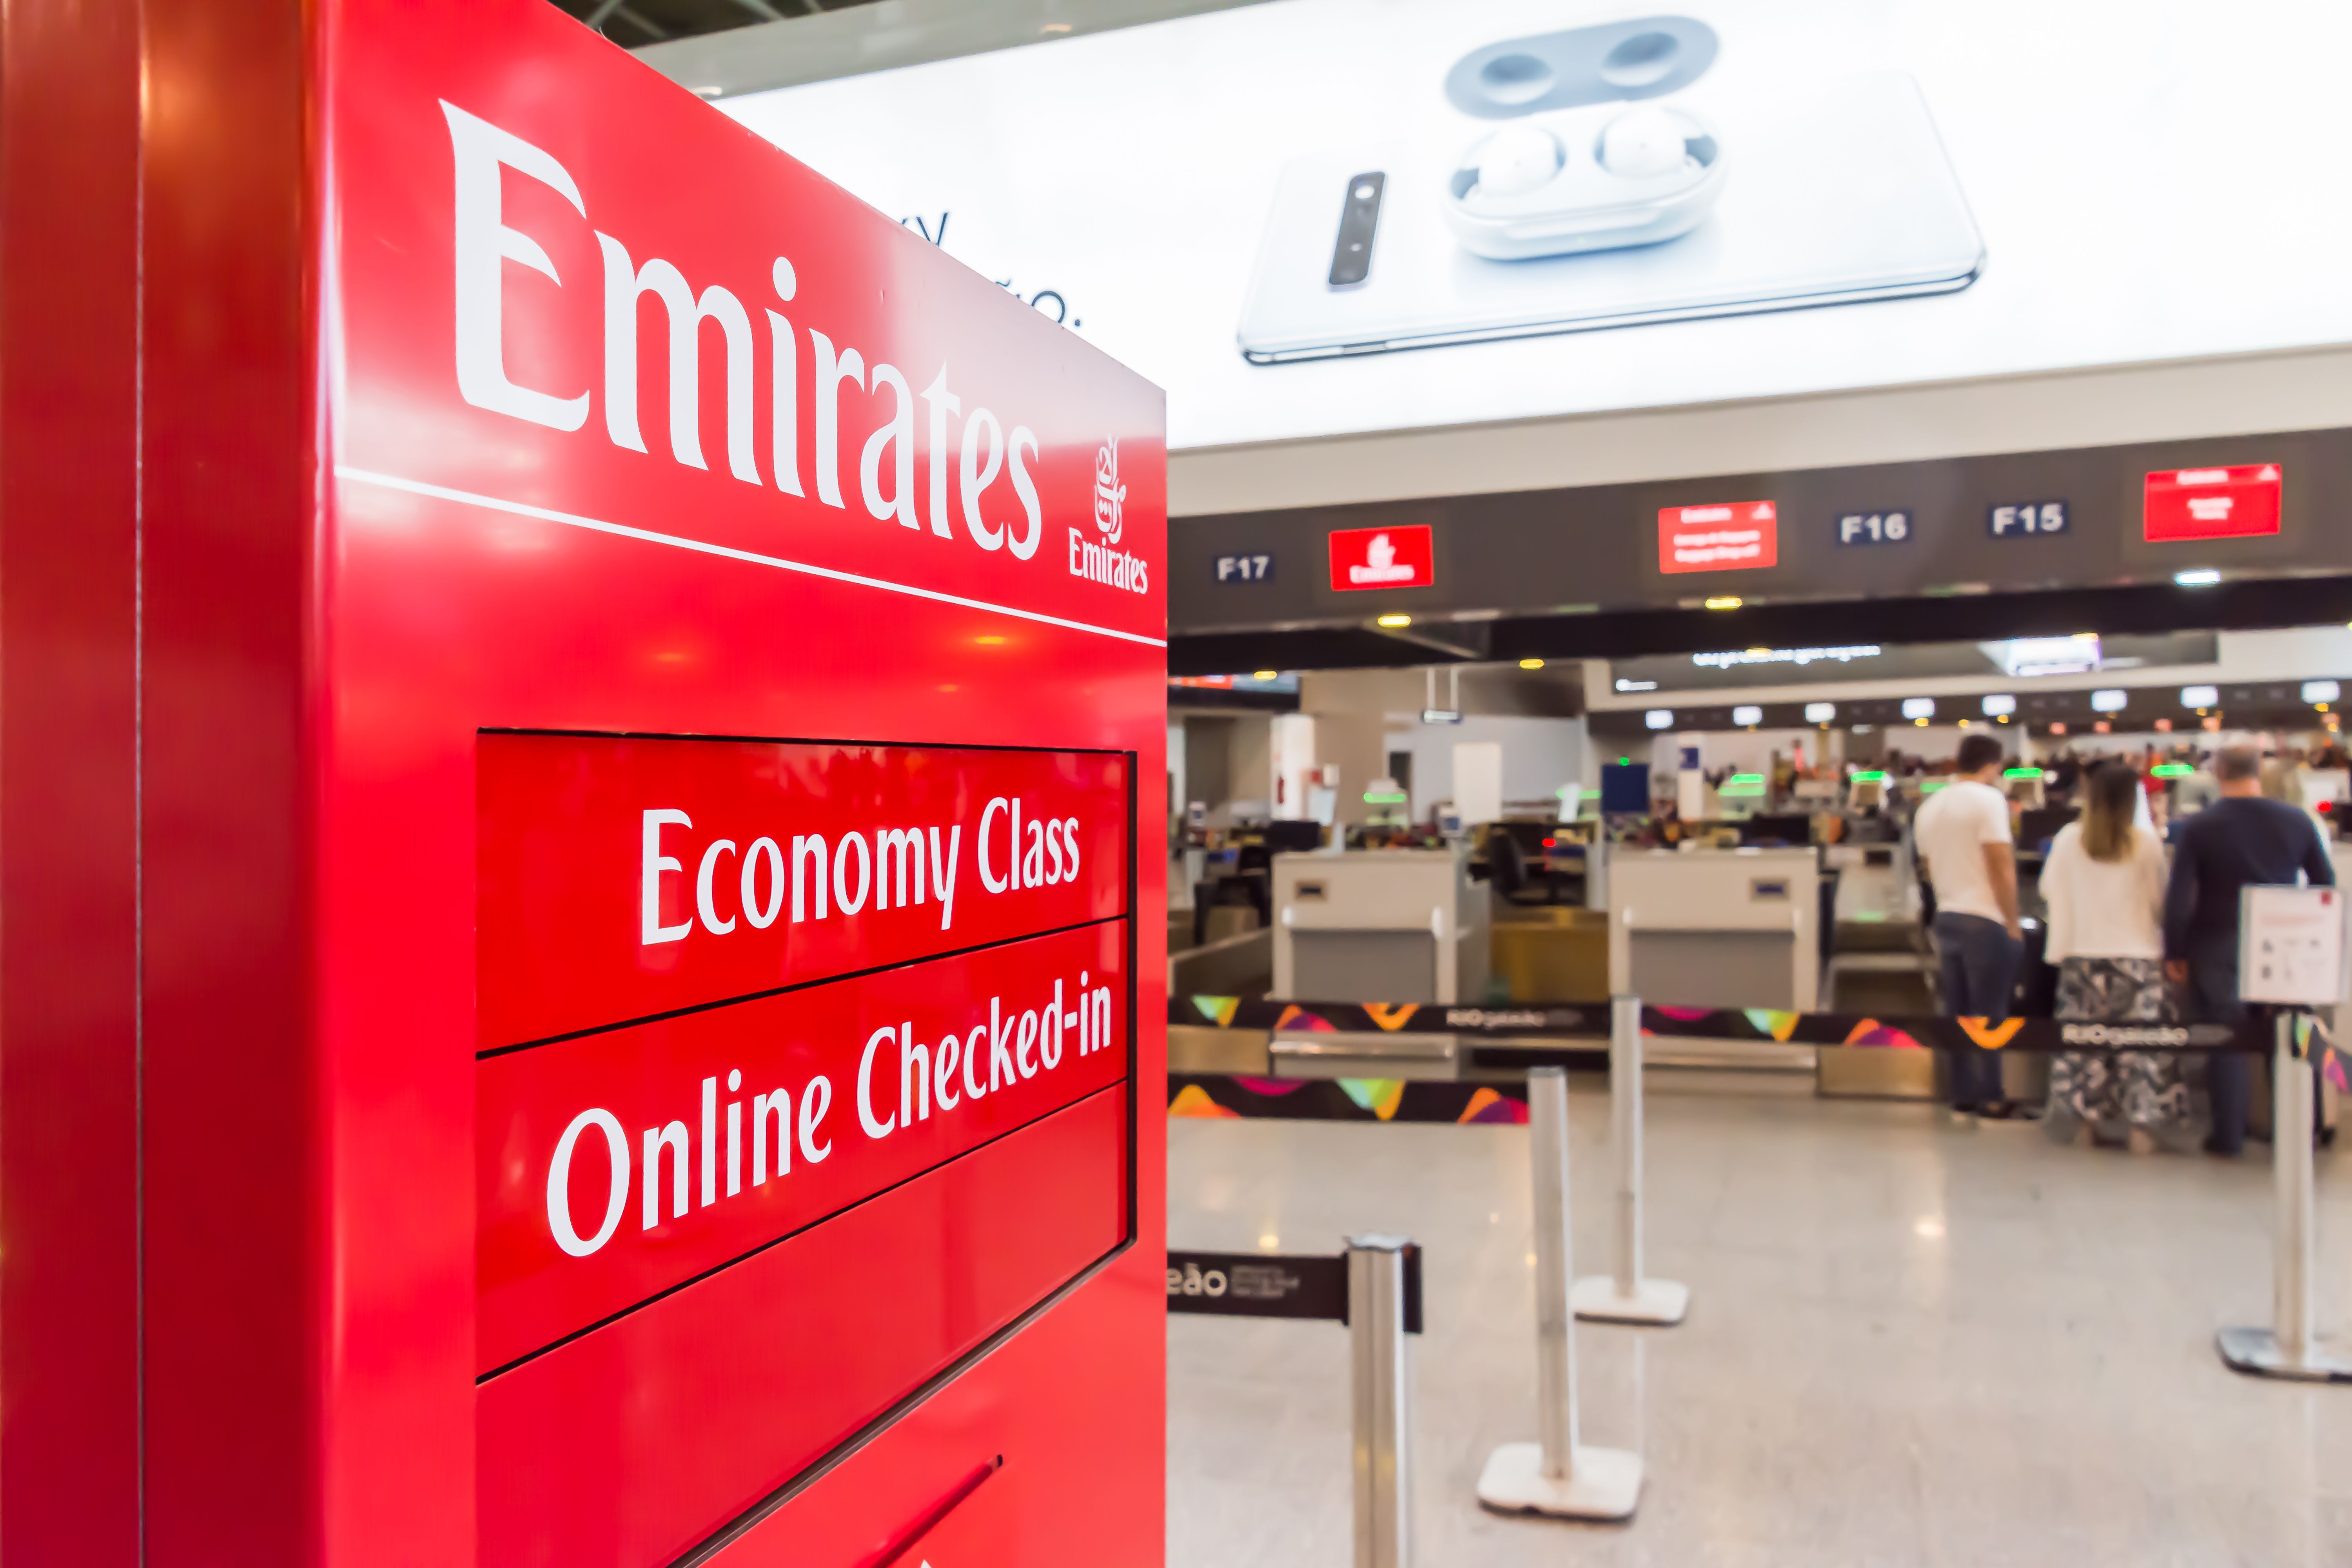 Emirates economy and online check-in counters.